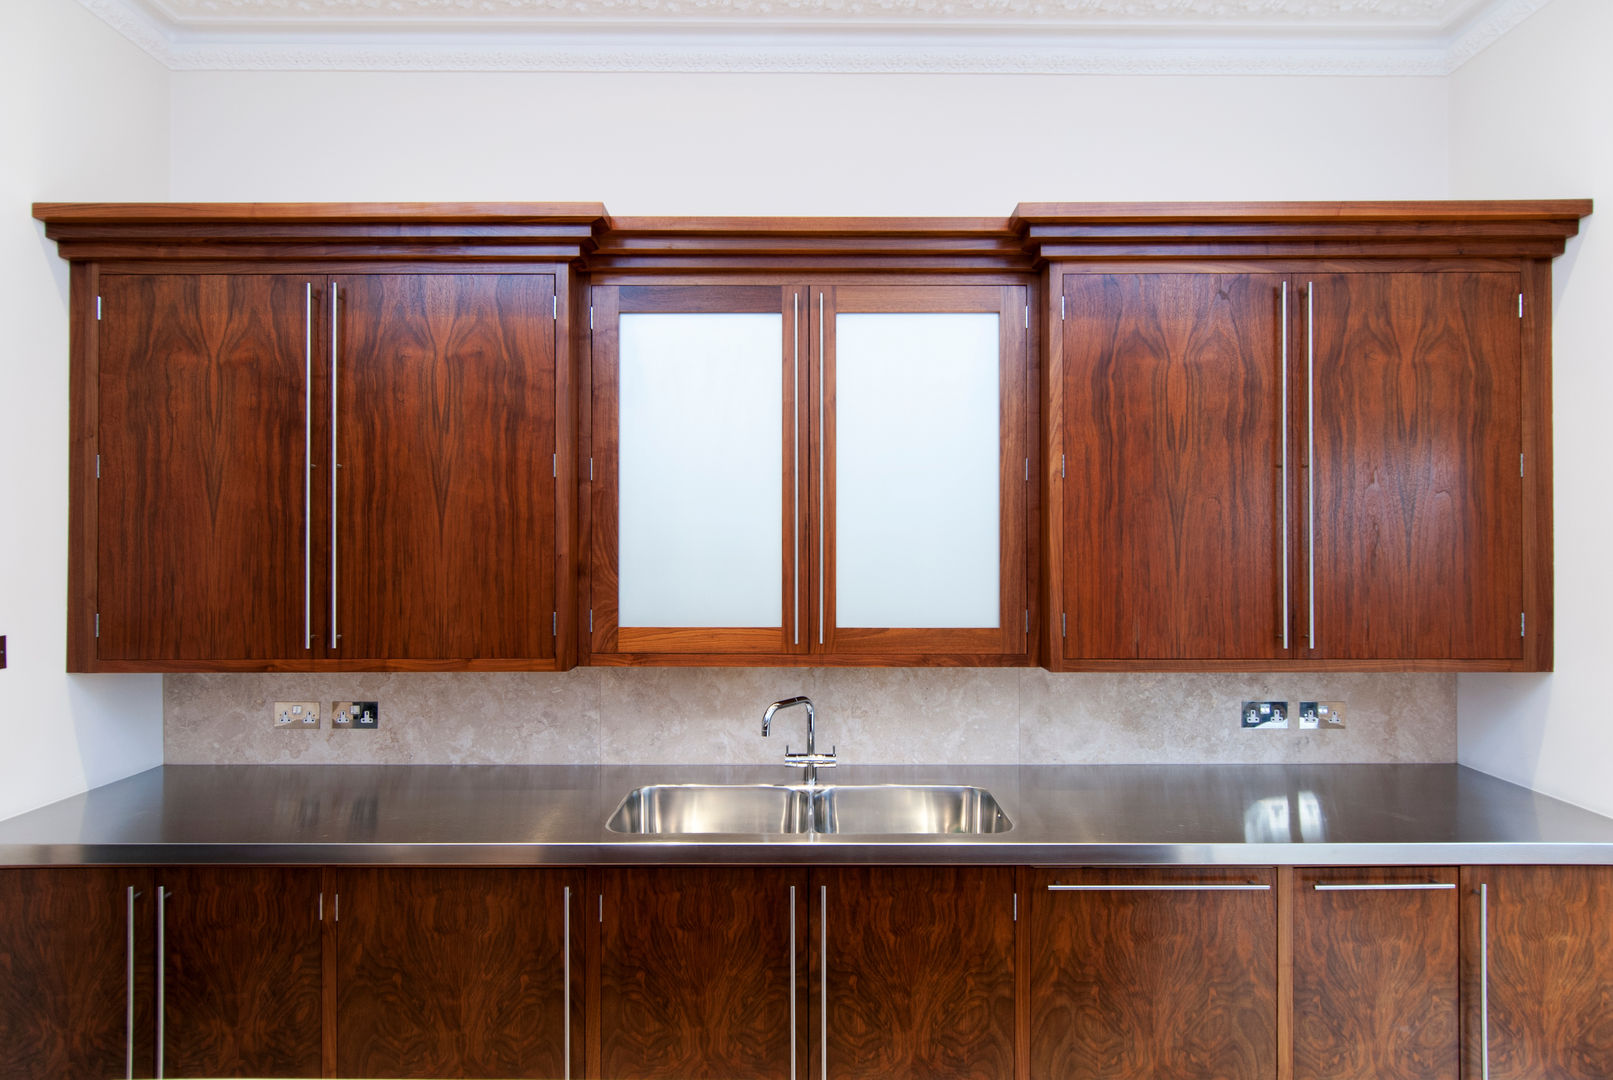 American Black Walnut Kitchen designed and made by Tim Wood Tim Wood Limited Kitchen